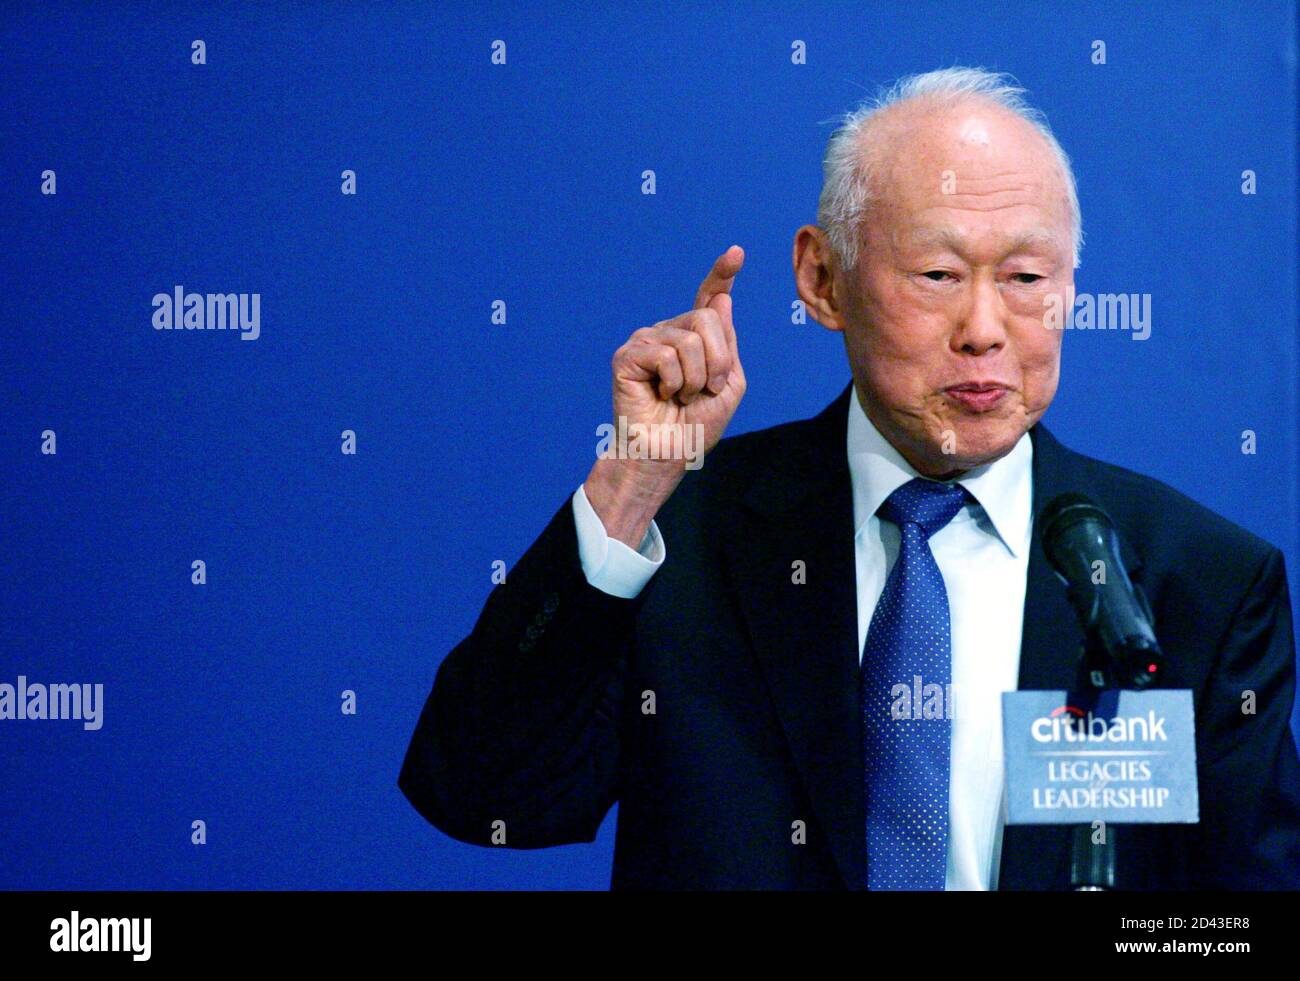 Singapore's Minister Mentor Lee Kuan Yew speaks during a business luncheon organised by Citibank in Hong Kong March 30, 2005. [Lee is the first Singaporean leader to meet acting Hong Kong leader Donald Tsang after former chief executive Tung Chee-hwa quit earlier this month.] Stock Photo